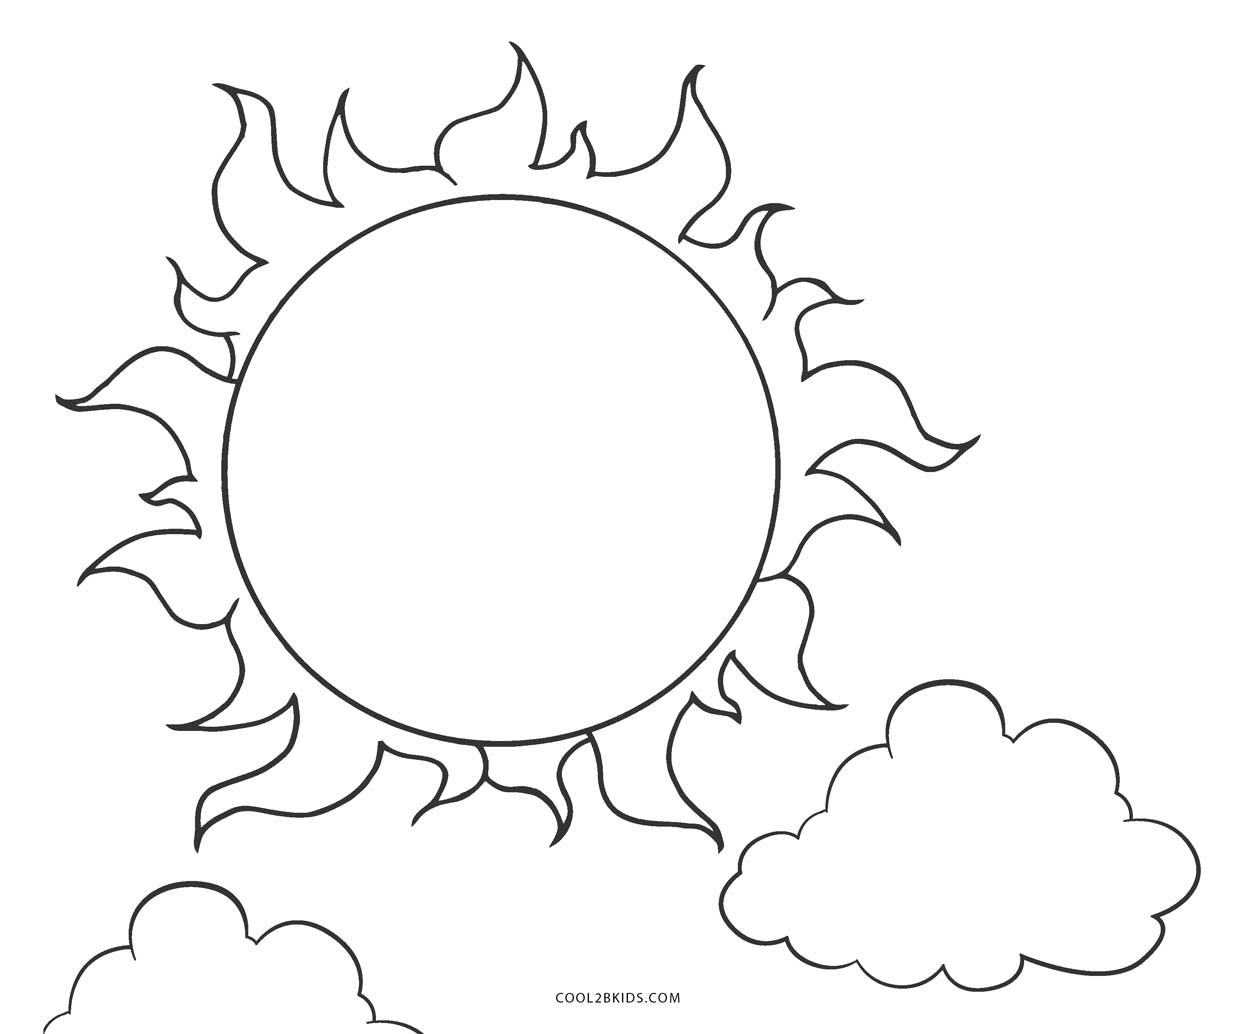 Sun Coloring Pages For Toddlers
 Free Printable Sun Coloring Pages For Kids